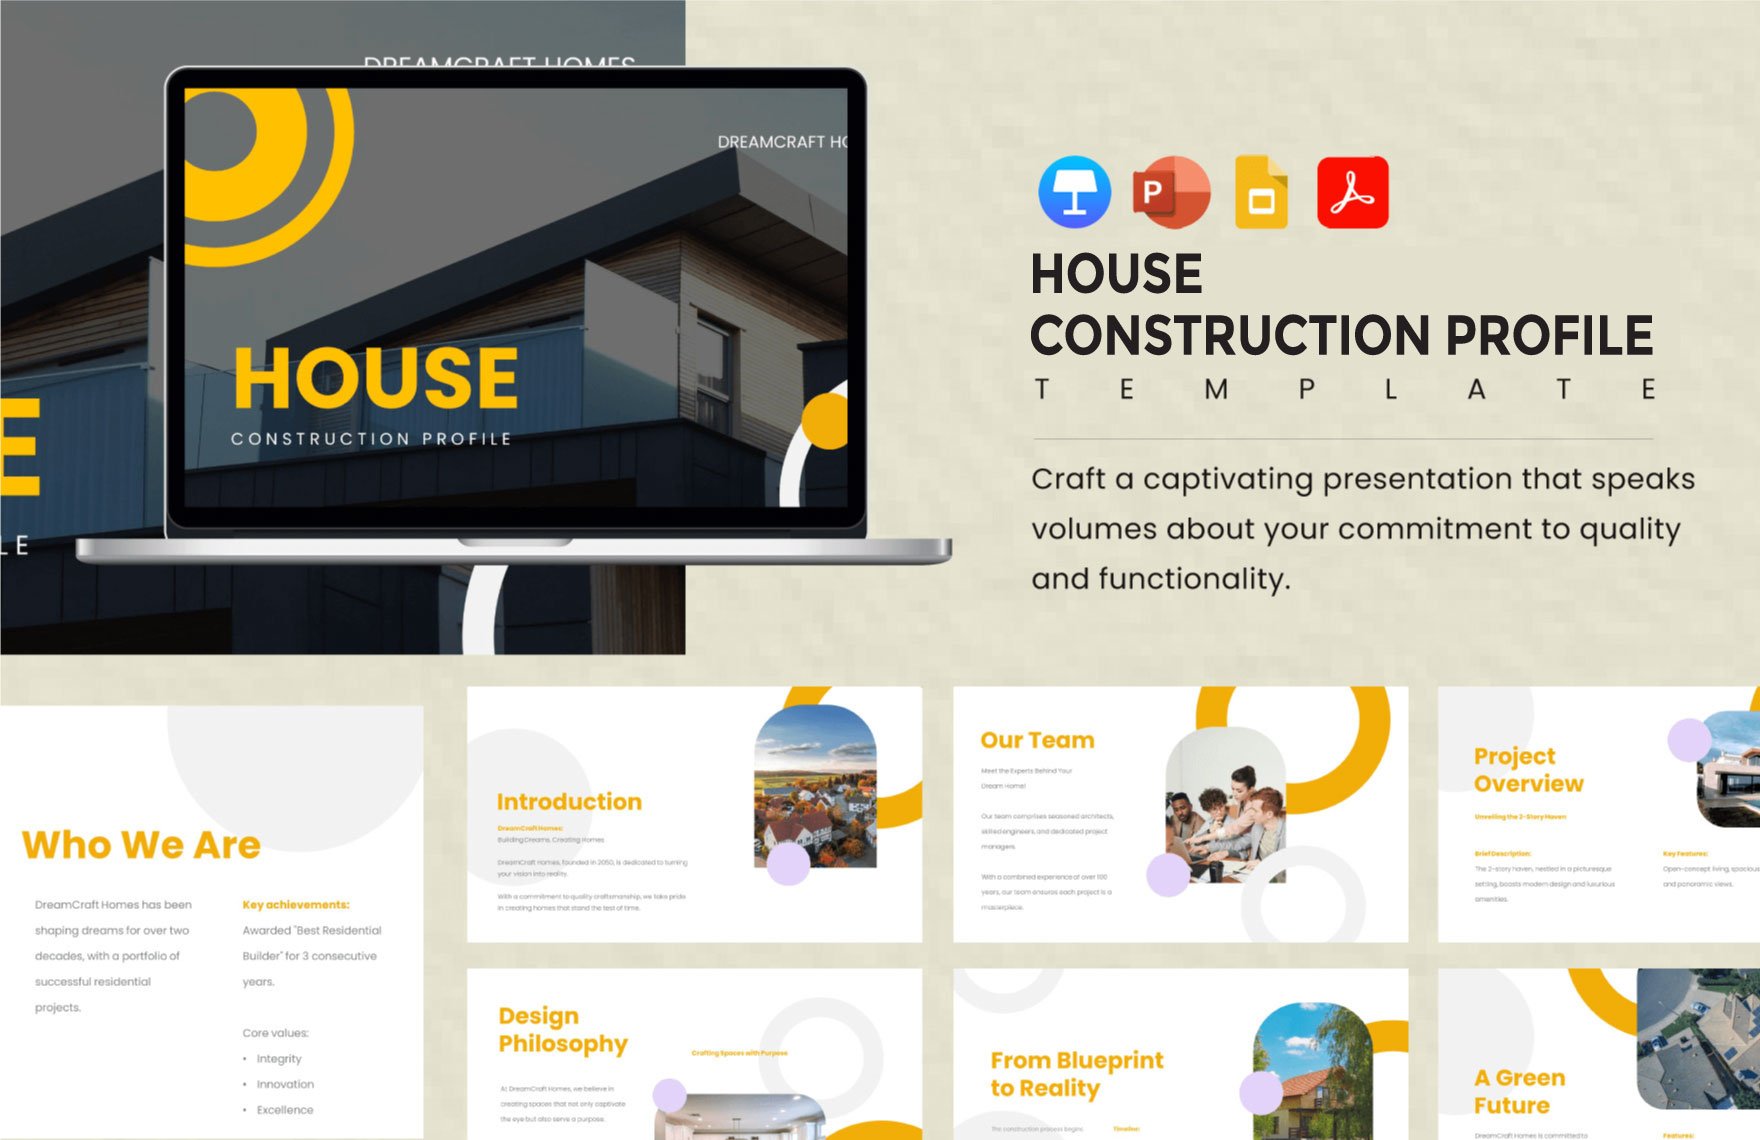 House Construction Profile Template in PDF, PowerPoint, Apple Keynote